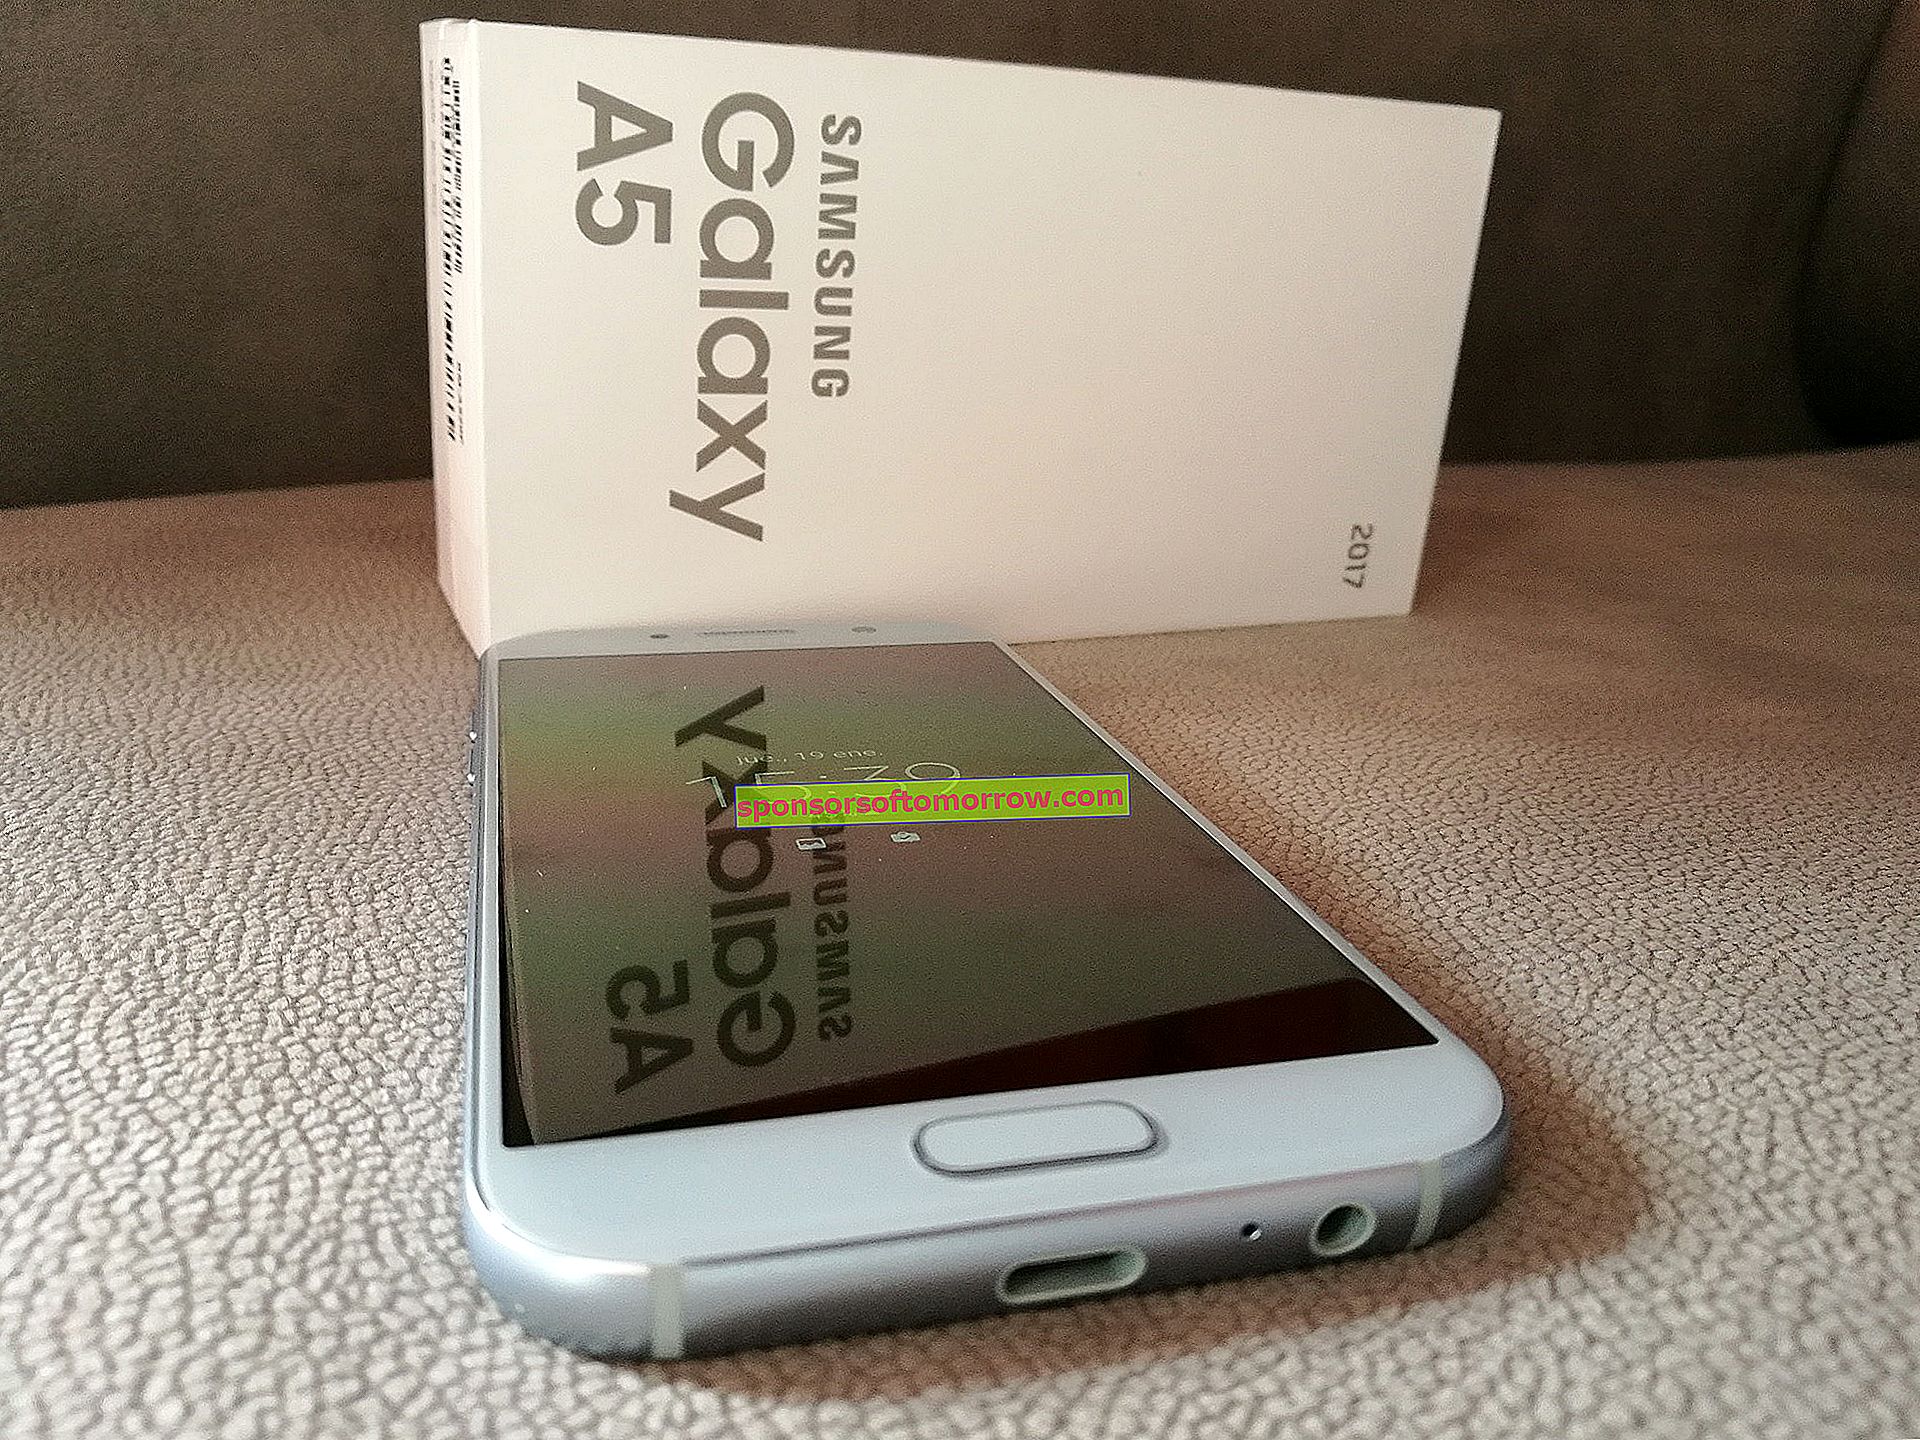 Samsung Galaxy A5 2017, we have tested it